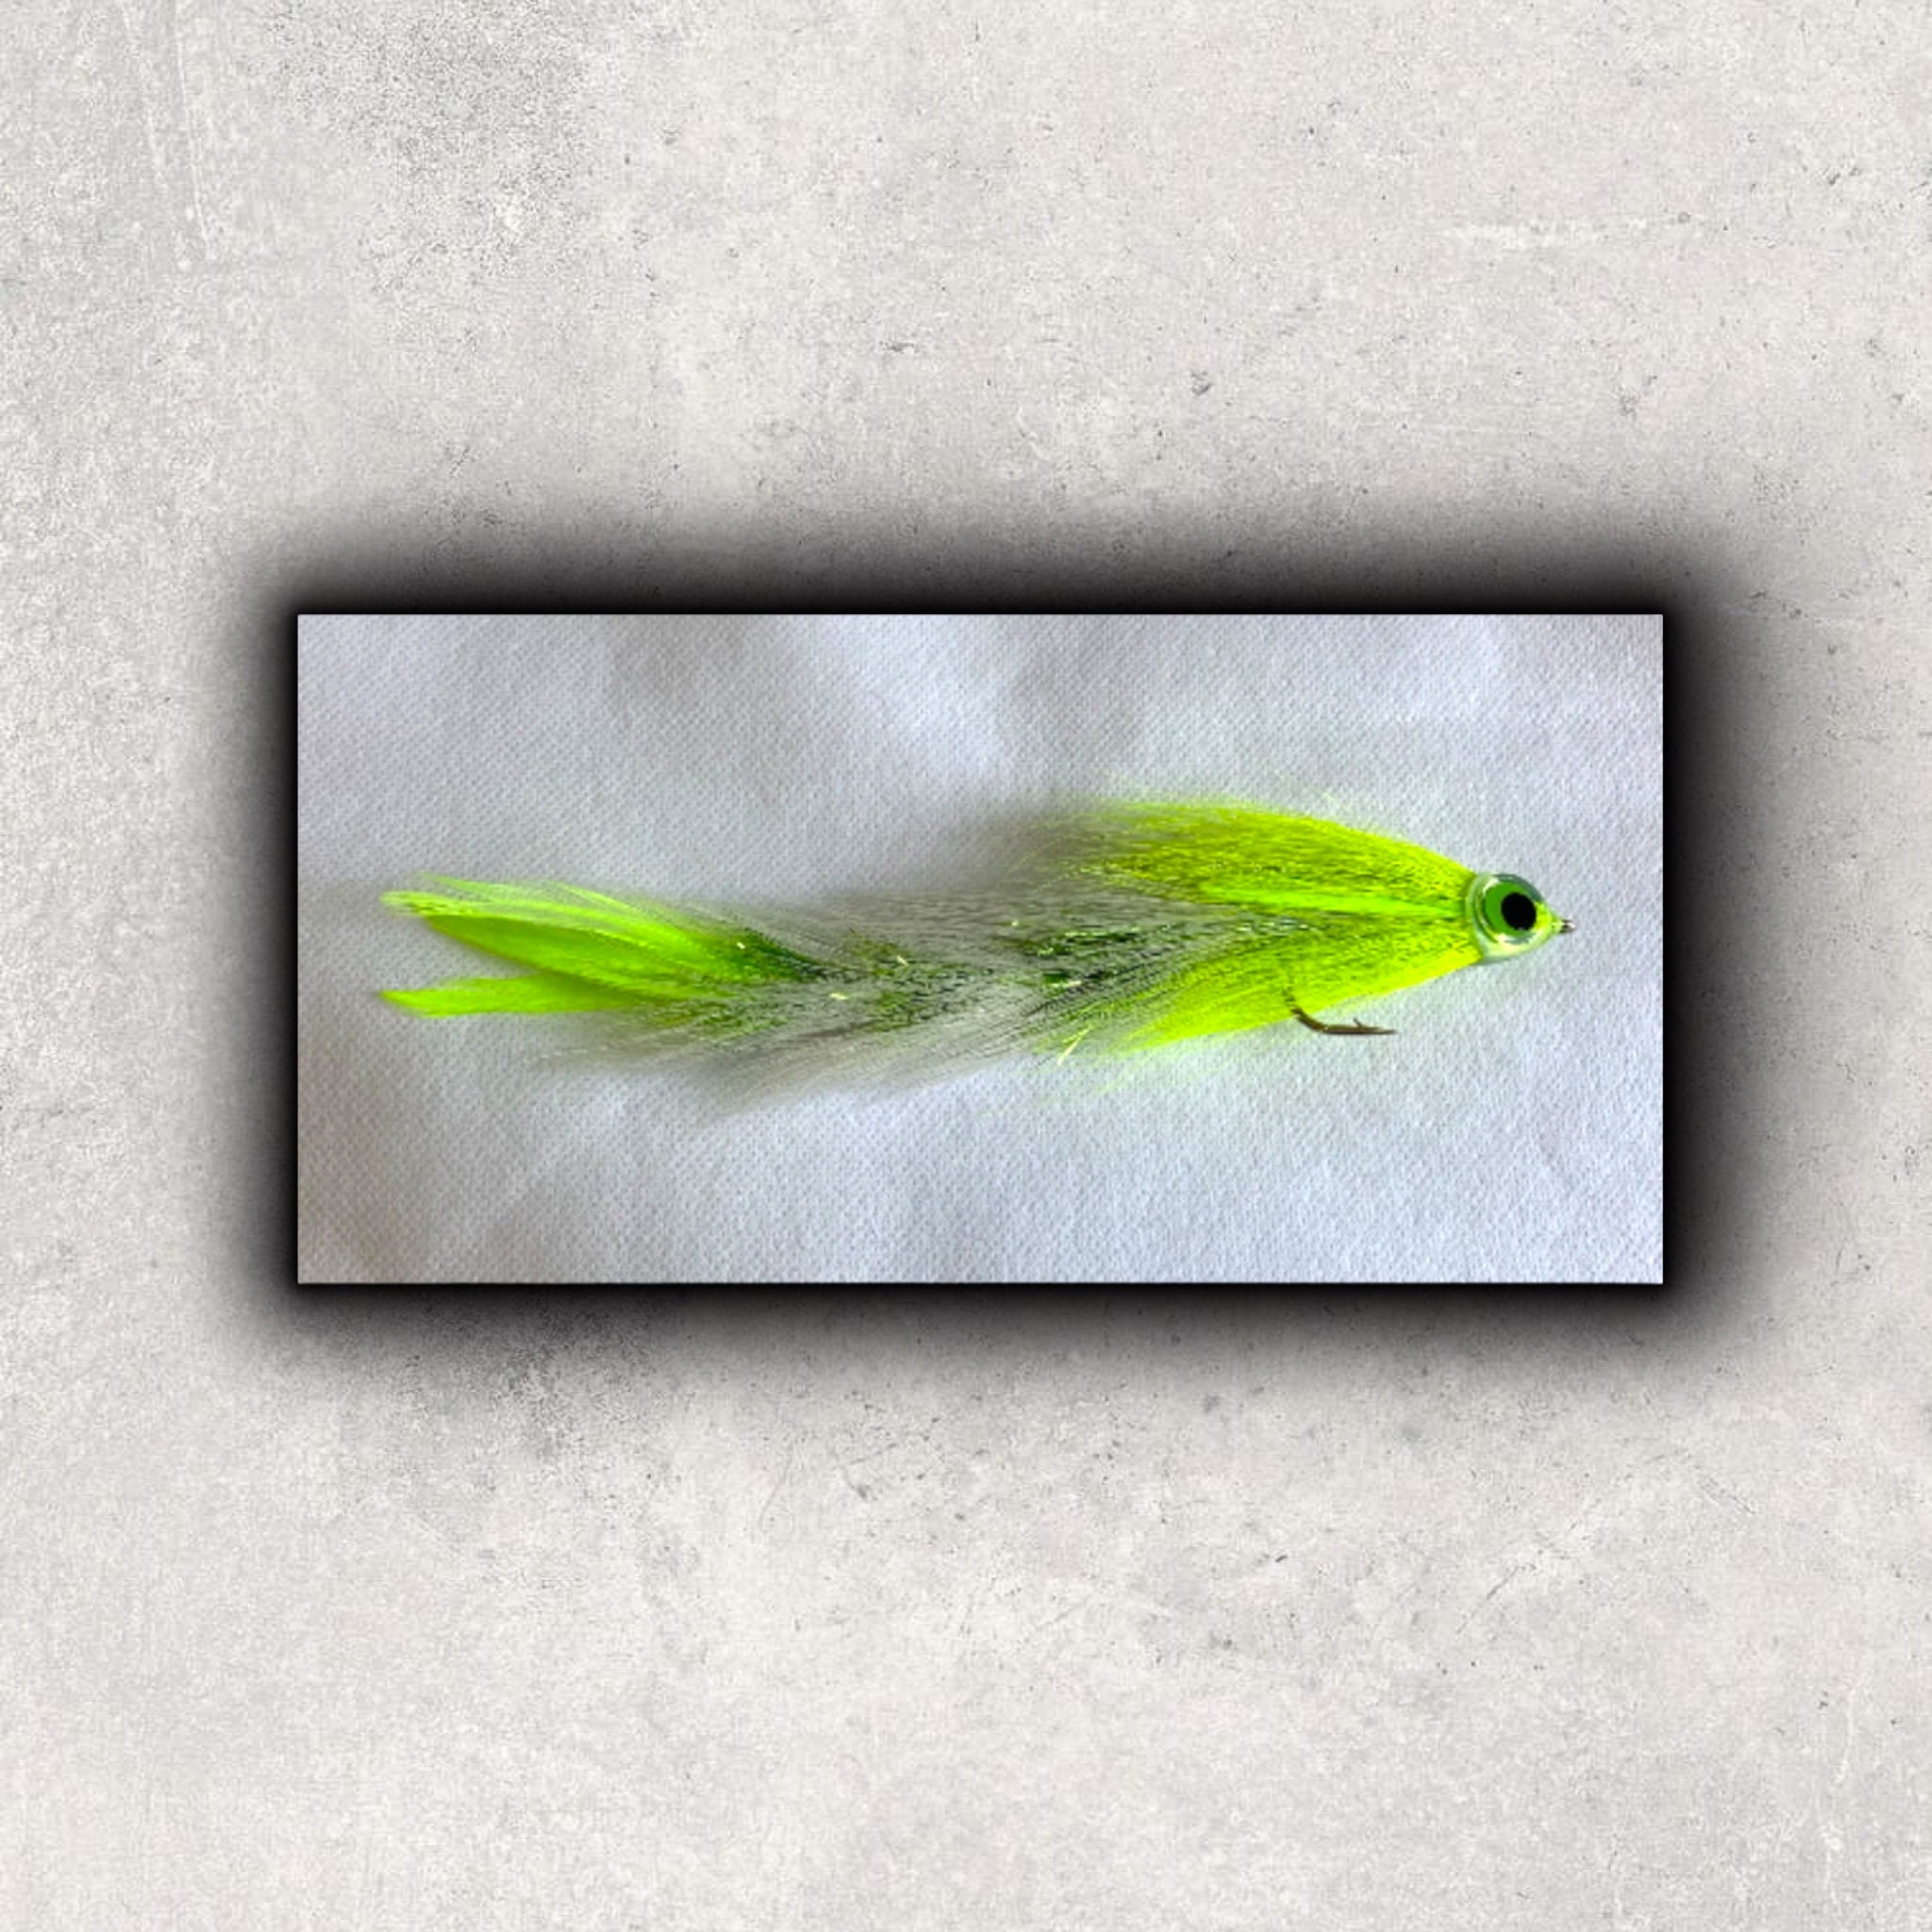 Jointed Fishing Lure Fly Fishing Chartreuse and White Big Game Changer Fly  Muskie, Pike, Bass, Striper Trolling Streamer 6 to 8 